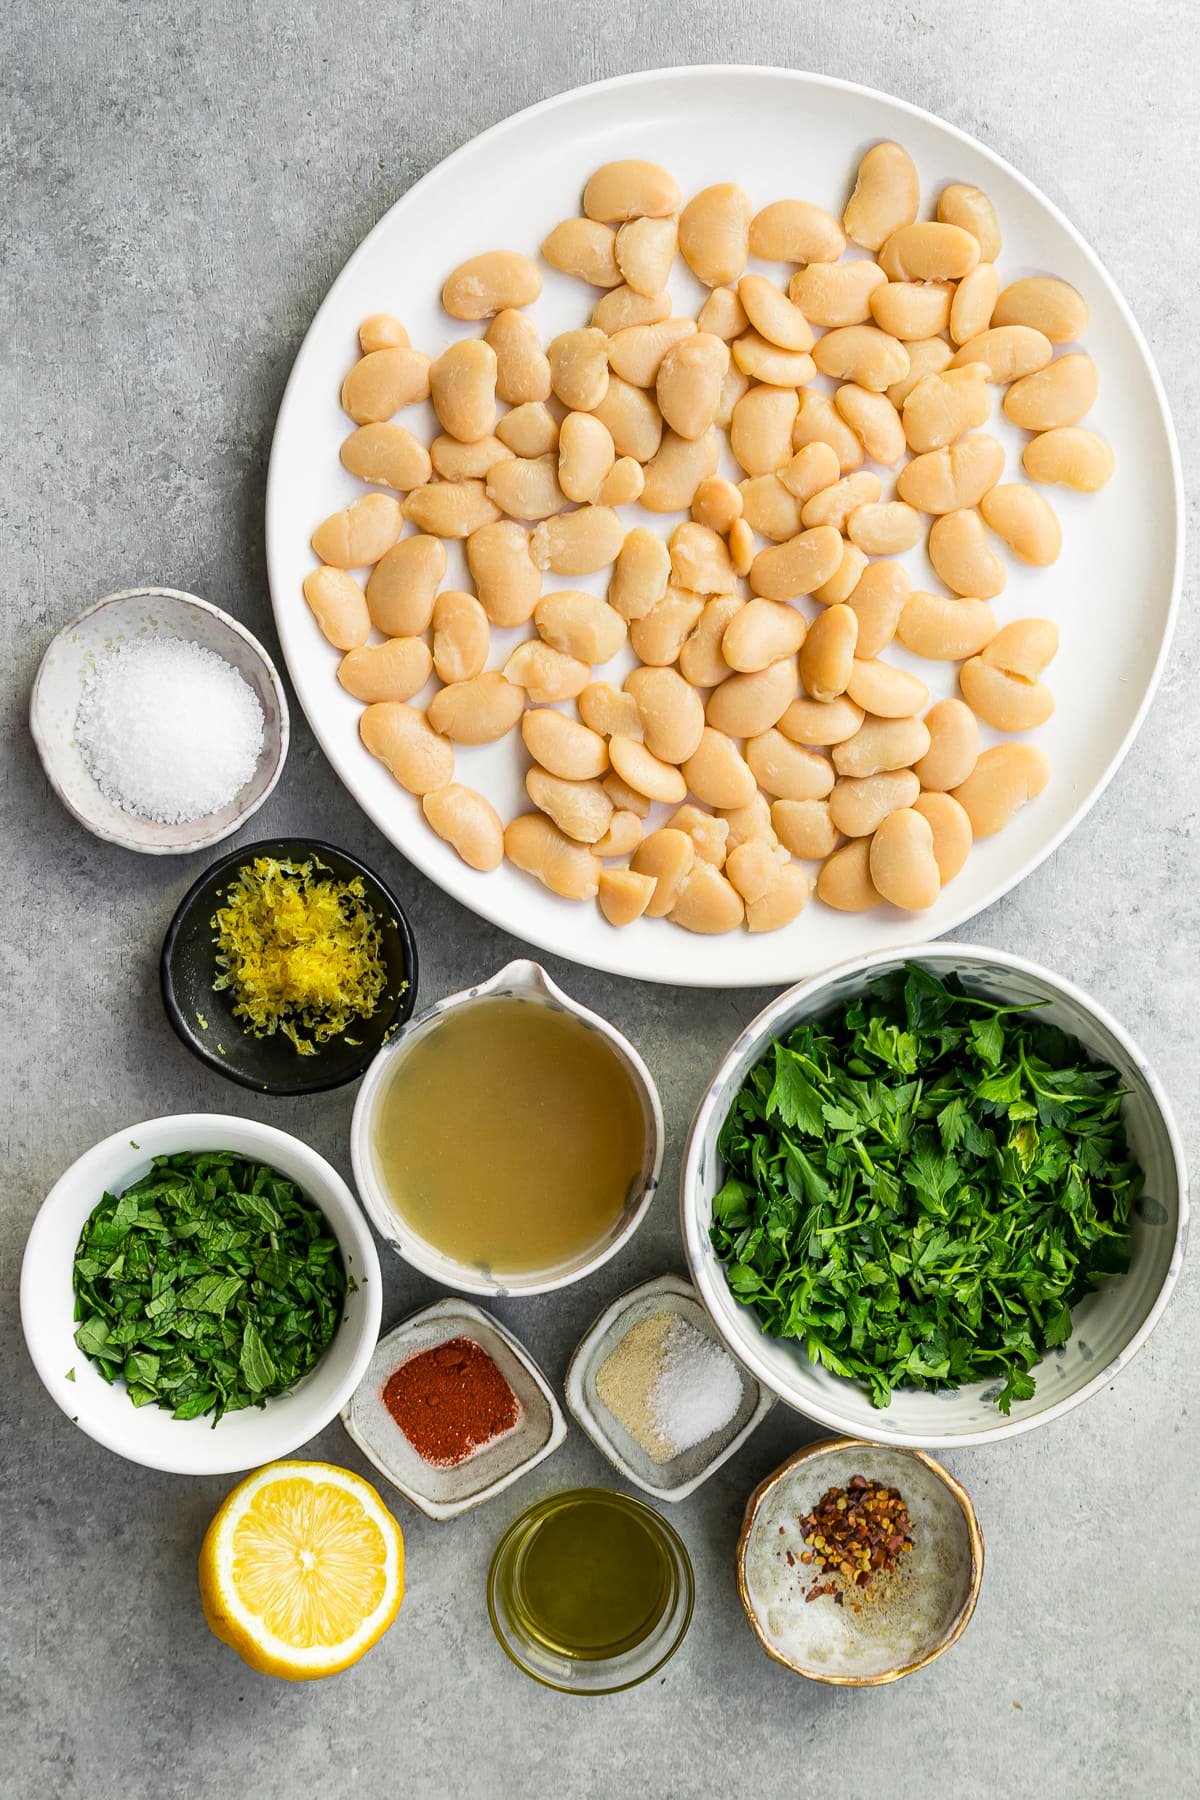 canned butter beans, herbs and spices